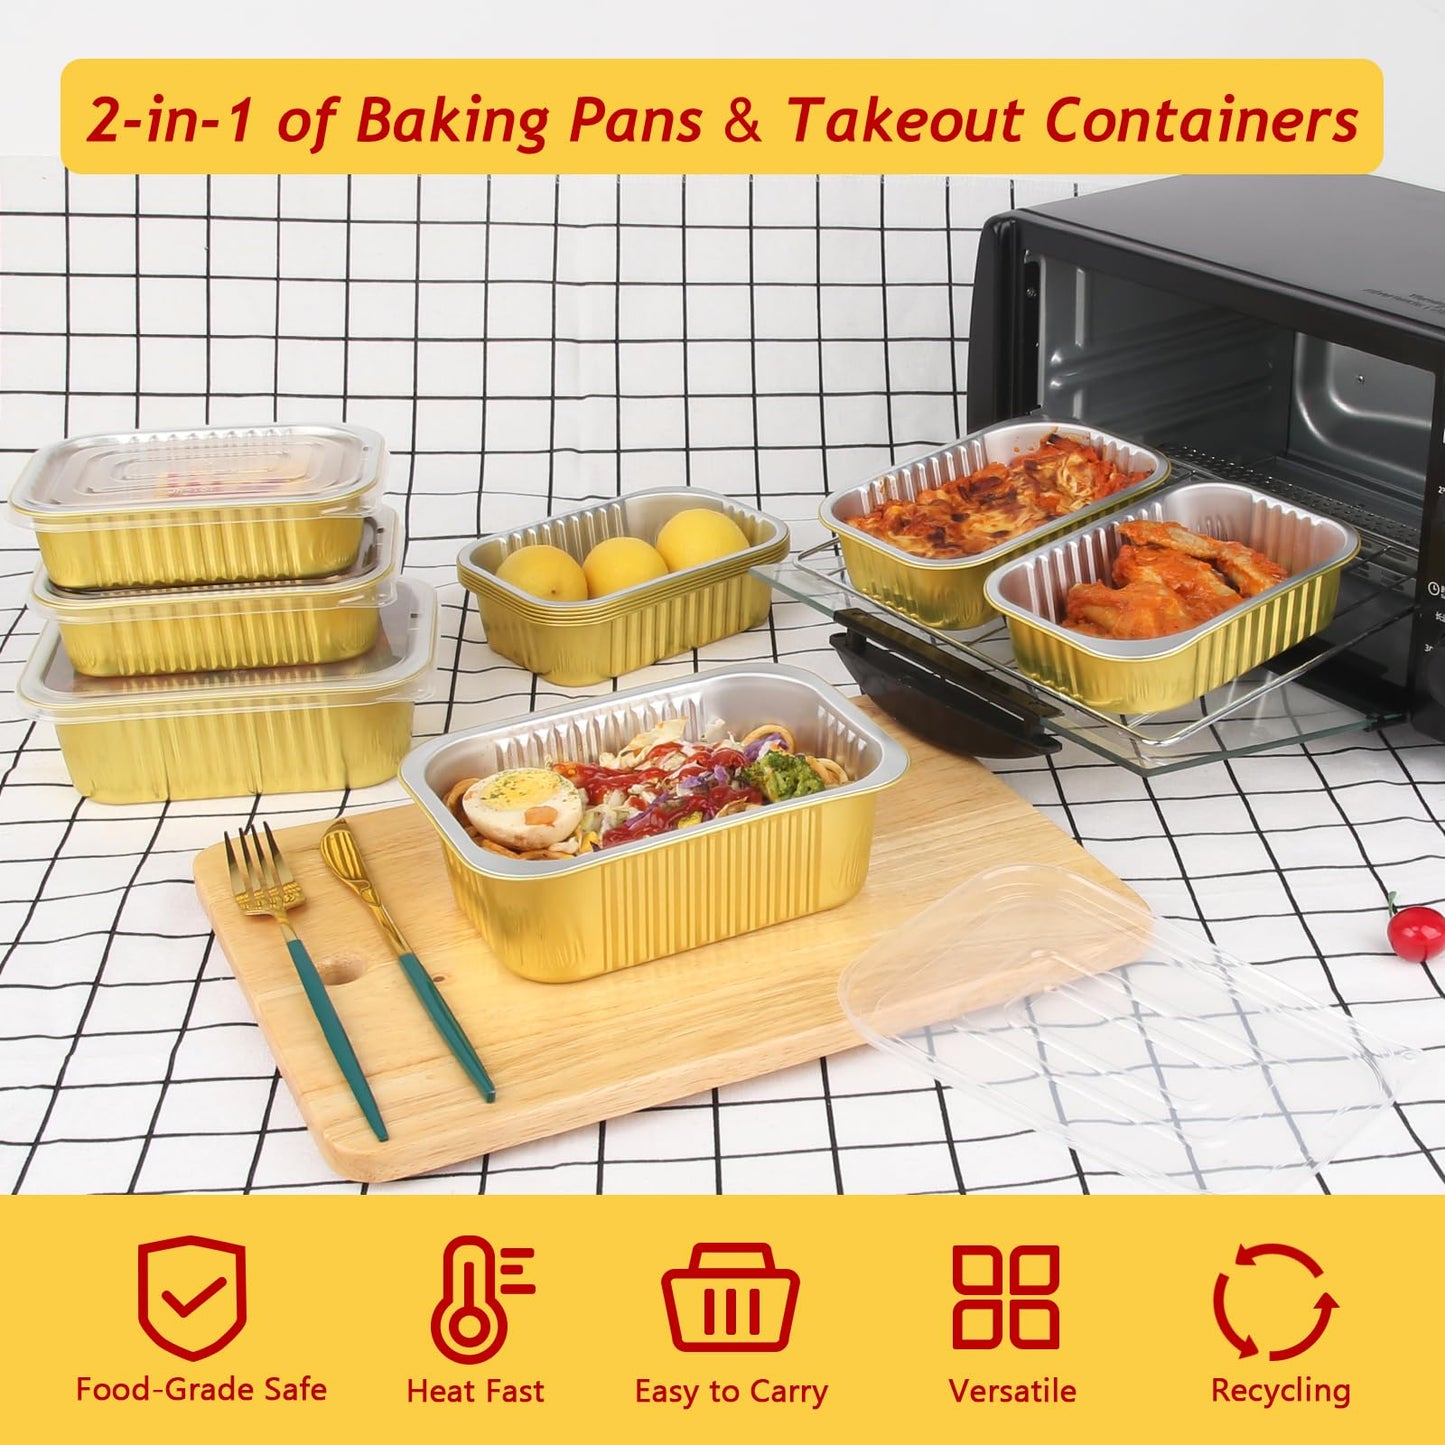 LNYZQUS 1lb Small Aluminum Pans With Lids 30 Pack, 16oz Foil Baking Tins Leftover Containers Takeout To Go Food Containers With PP Covers,Disposable Individual Pie Cake Pans Holders